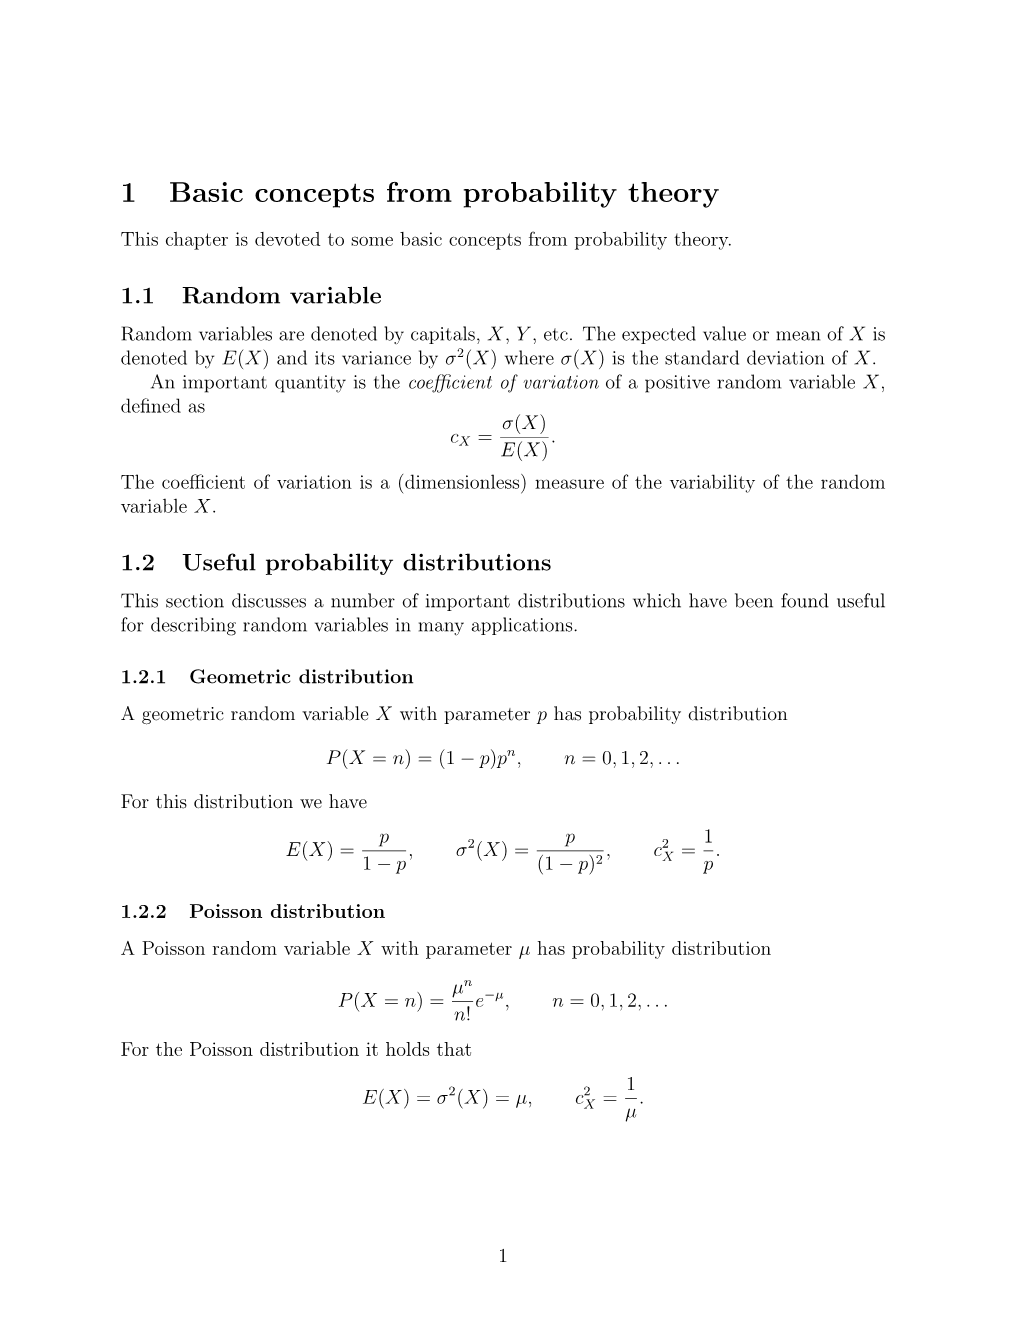 1 Basic Concepts from Probability Theory